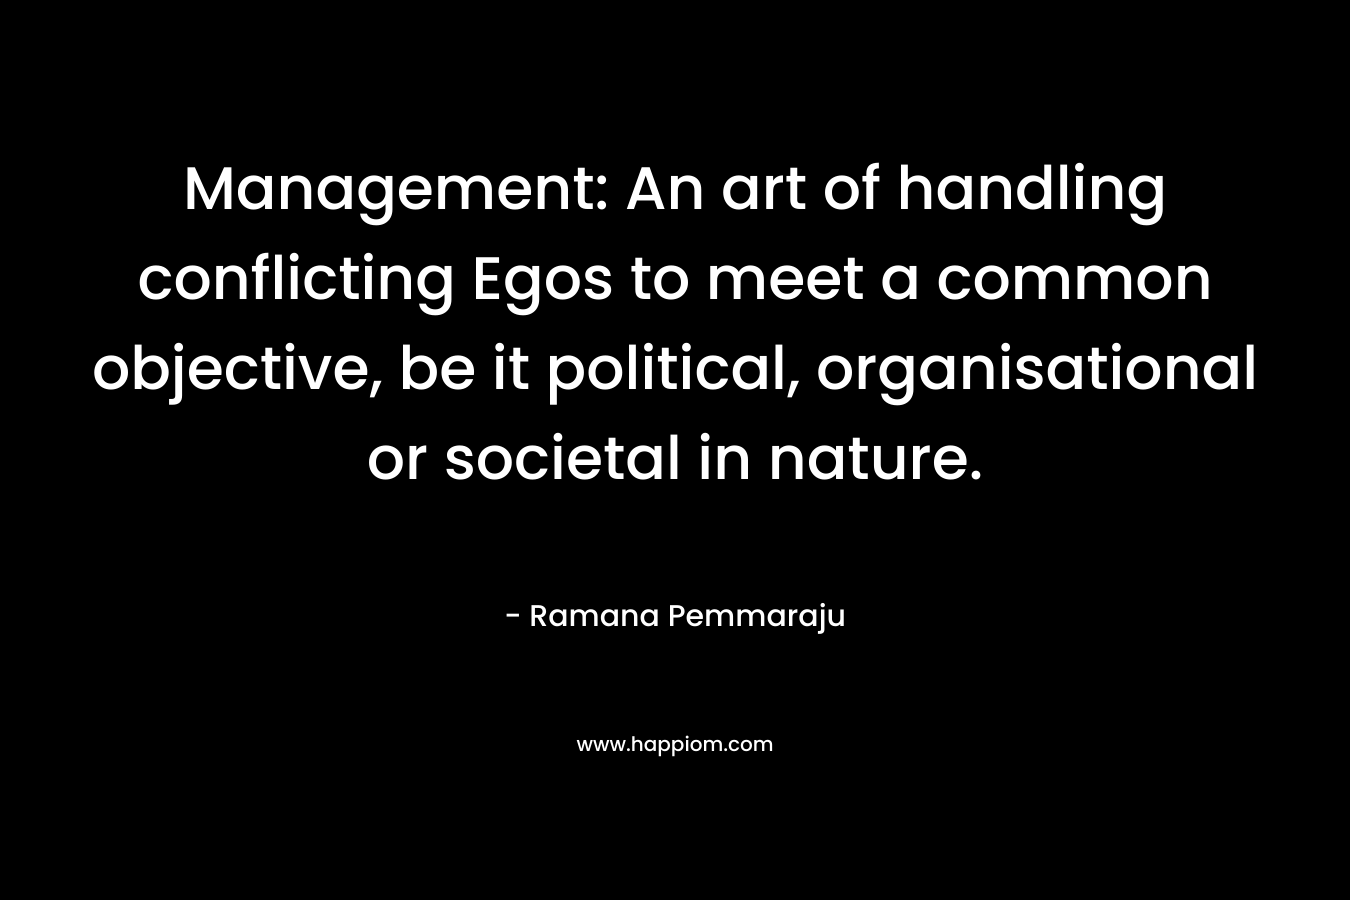 Management: An art of handling conflicting Egos to meet a common objective, be it political, organisational or societal in nature.